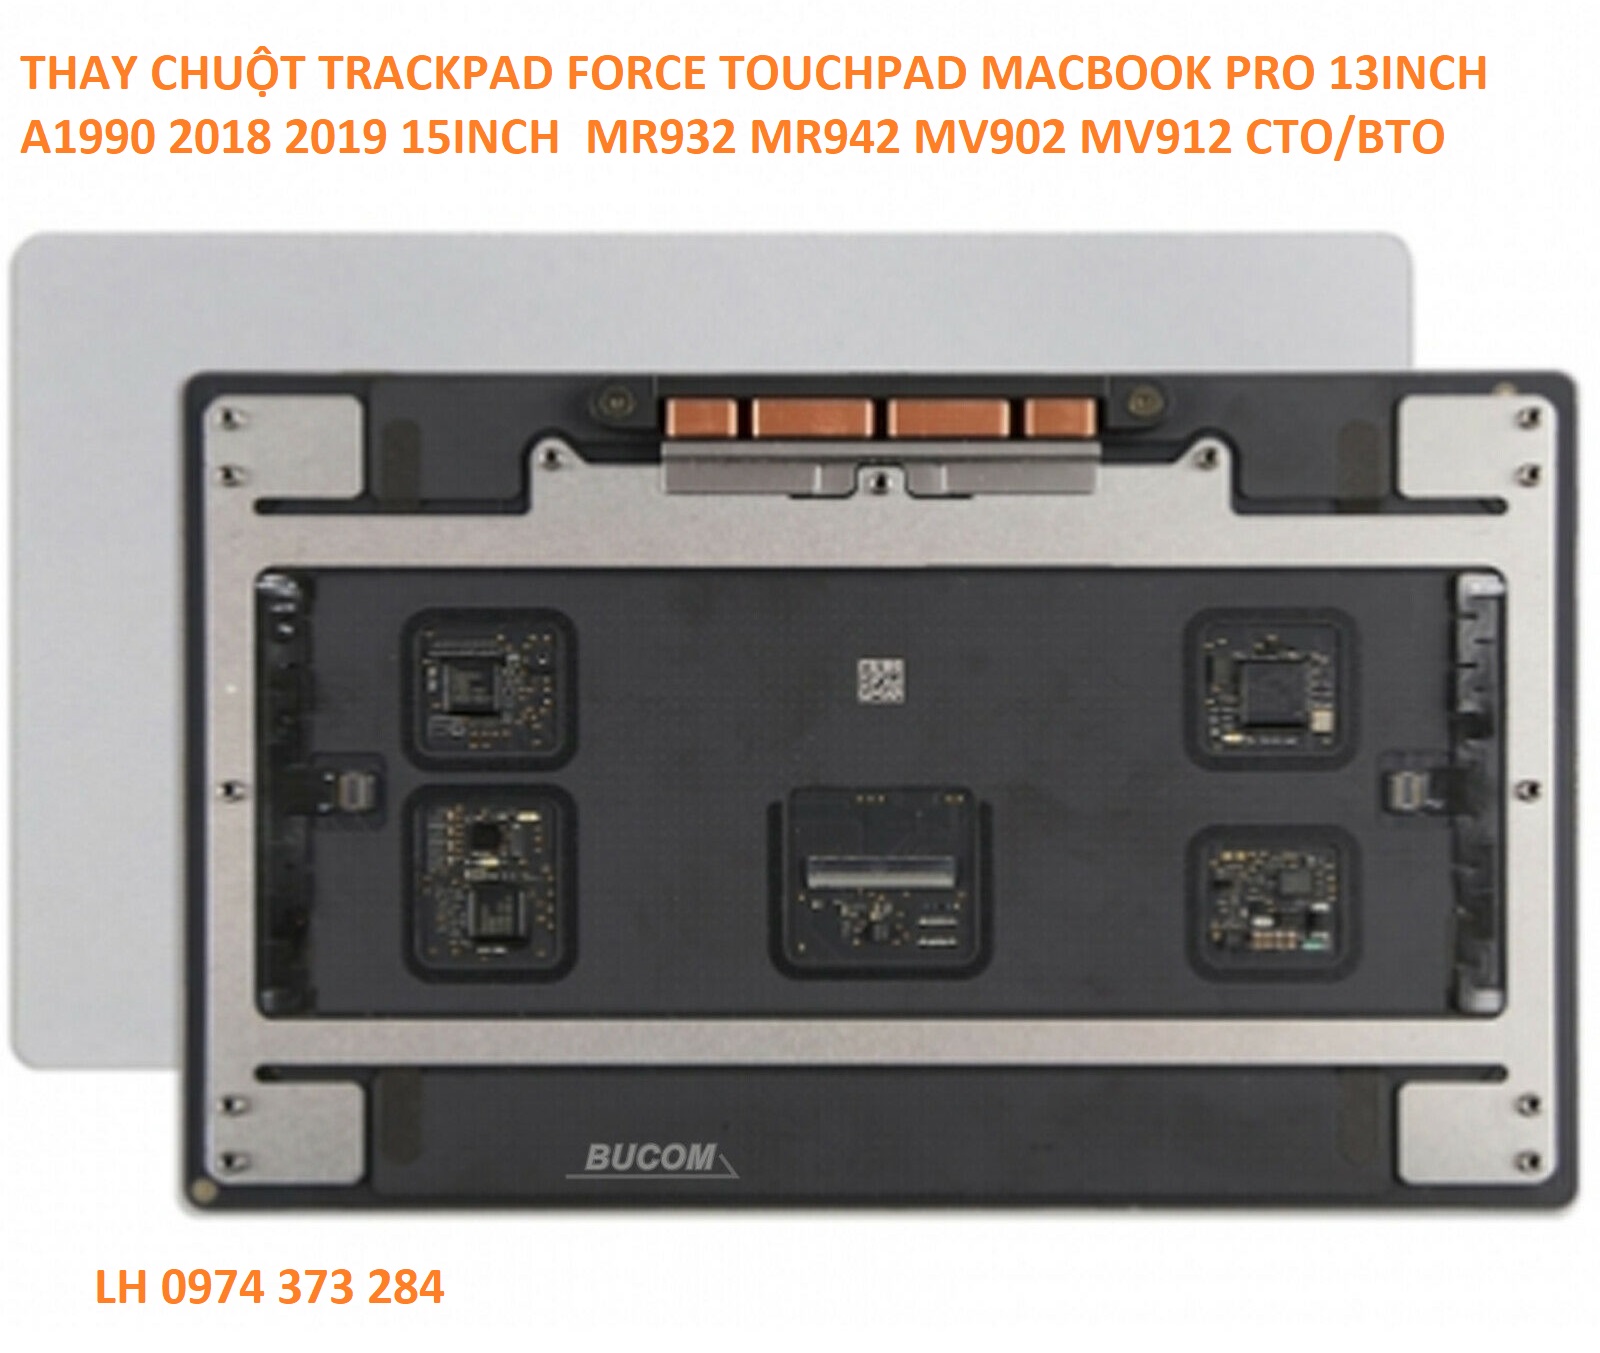 THAY CHUỘT TRACKPAD FORCE TOUCHPAD MACBOOK PRO 13INCH A1990 2018 2019 15INCH